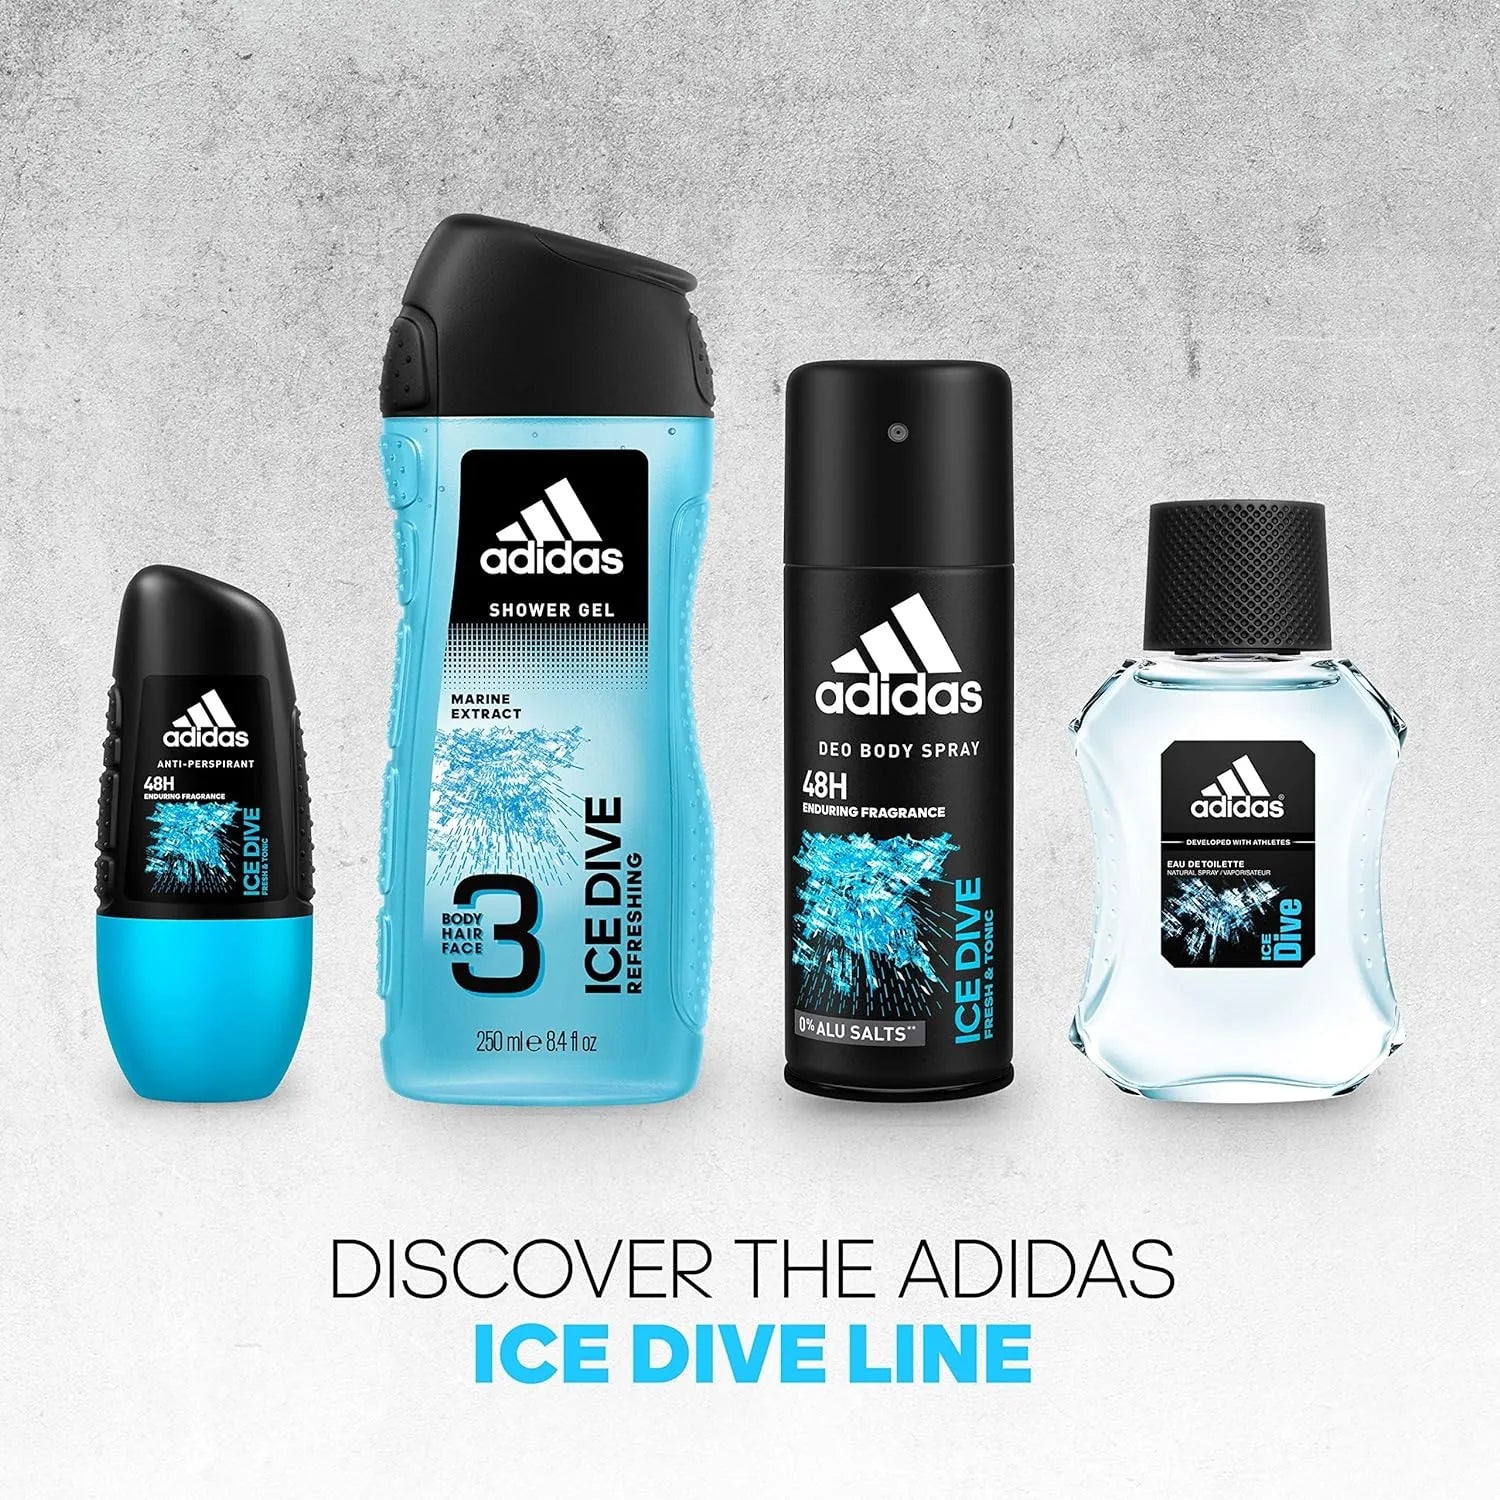 Blue Adidas Ice Dive Deodorant Spray can with icy design elements and a man's silhouette.